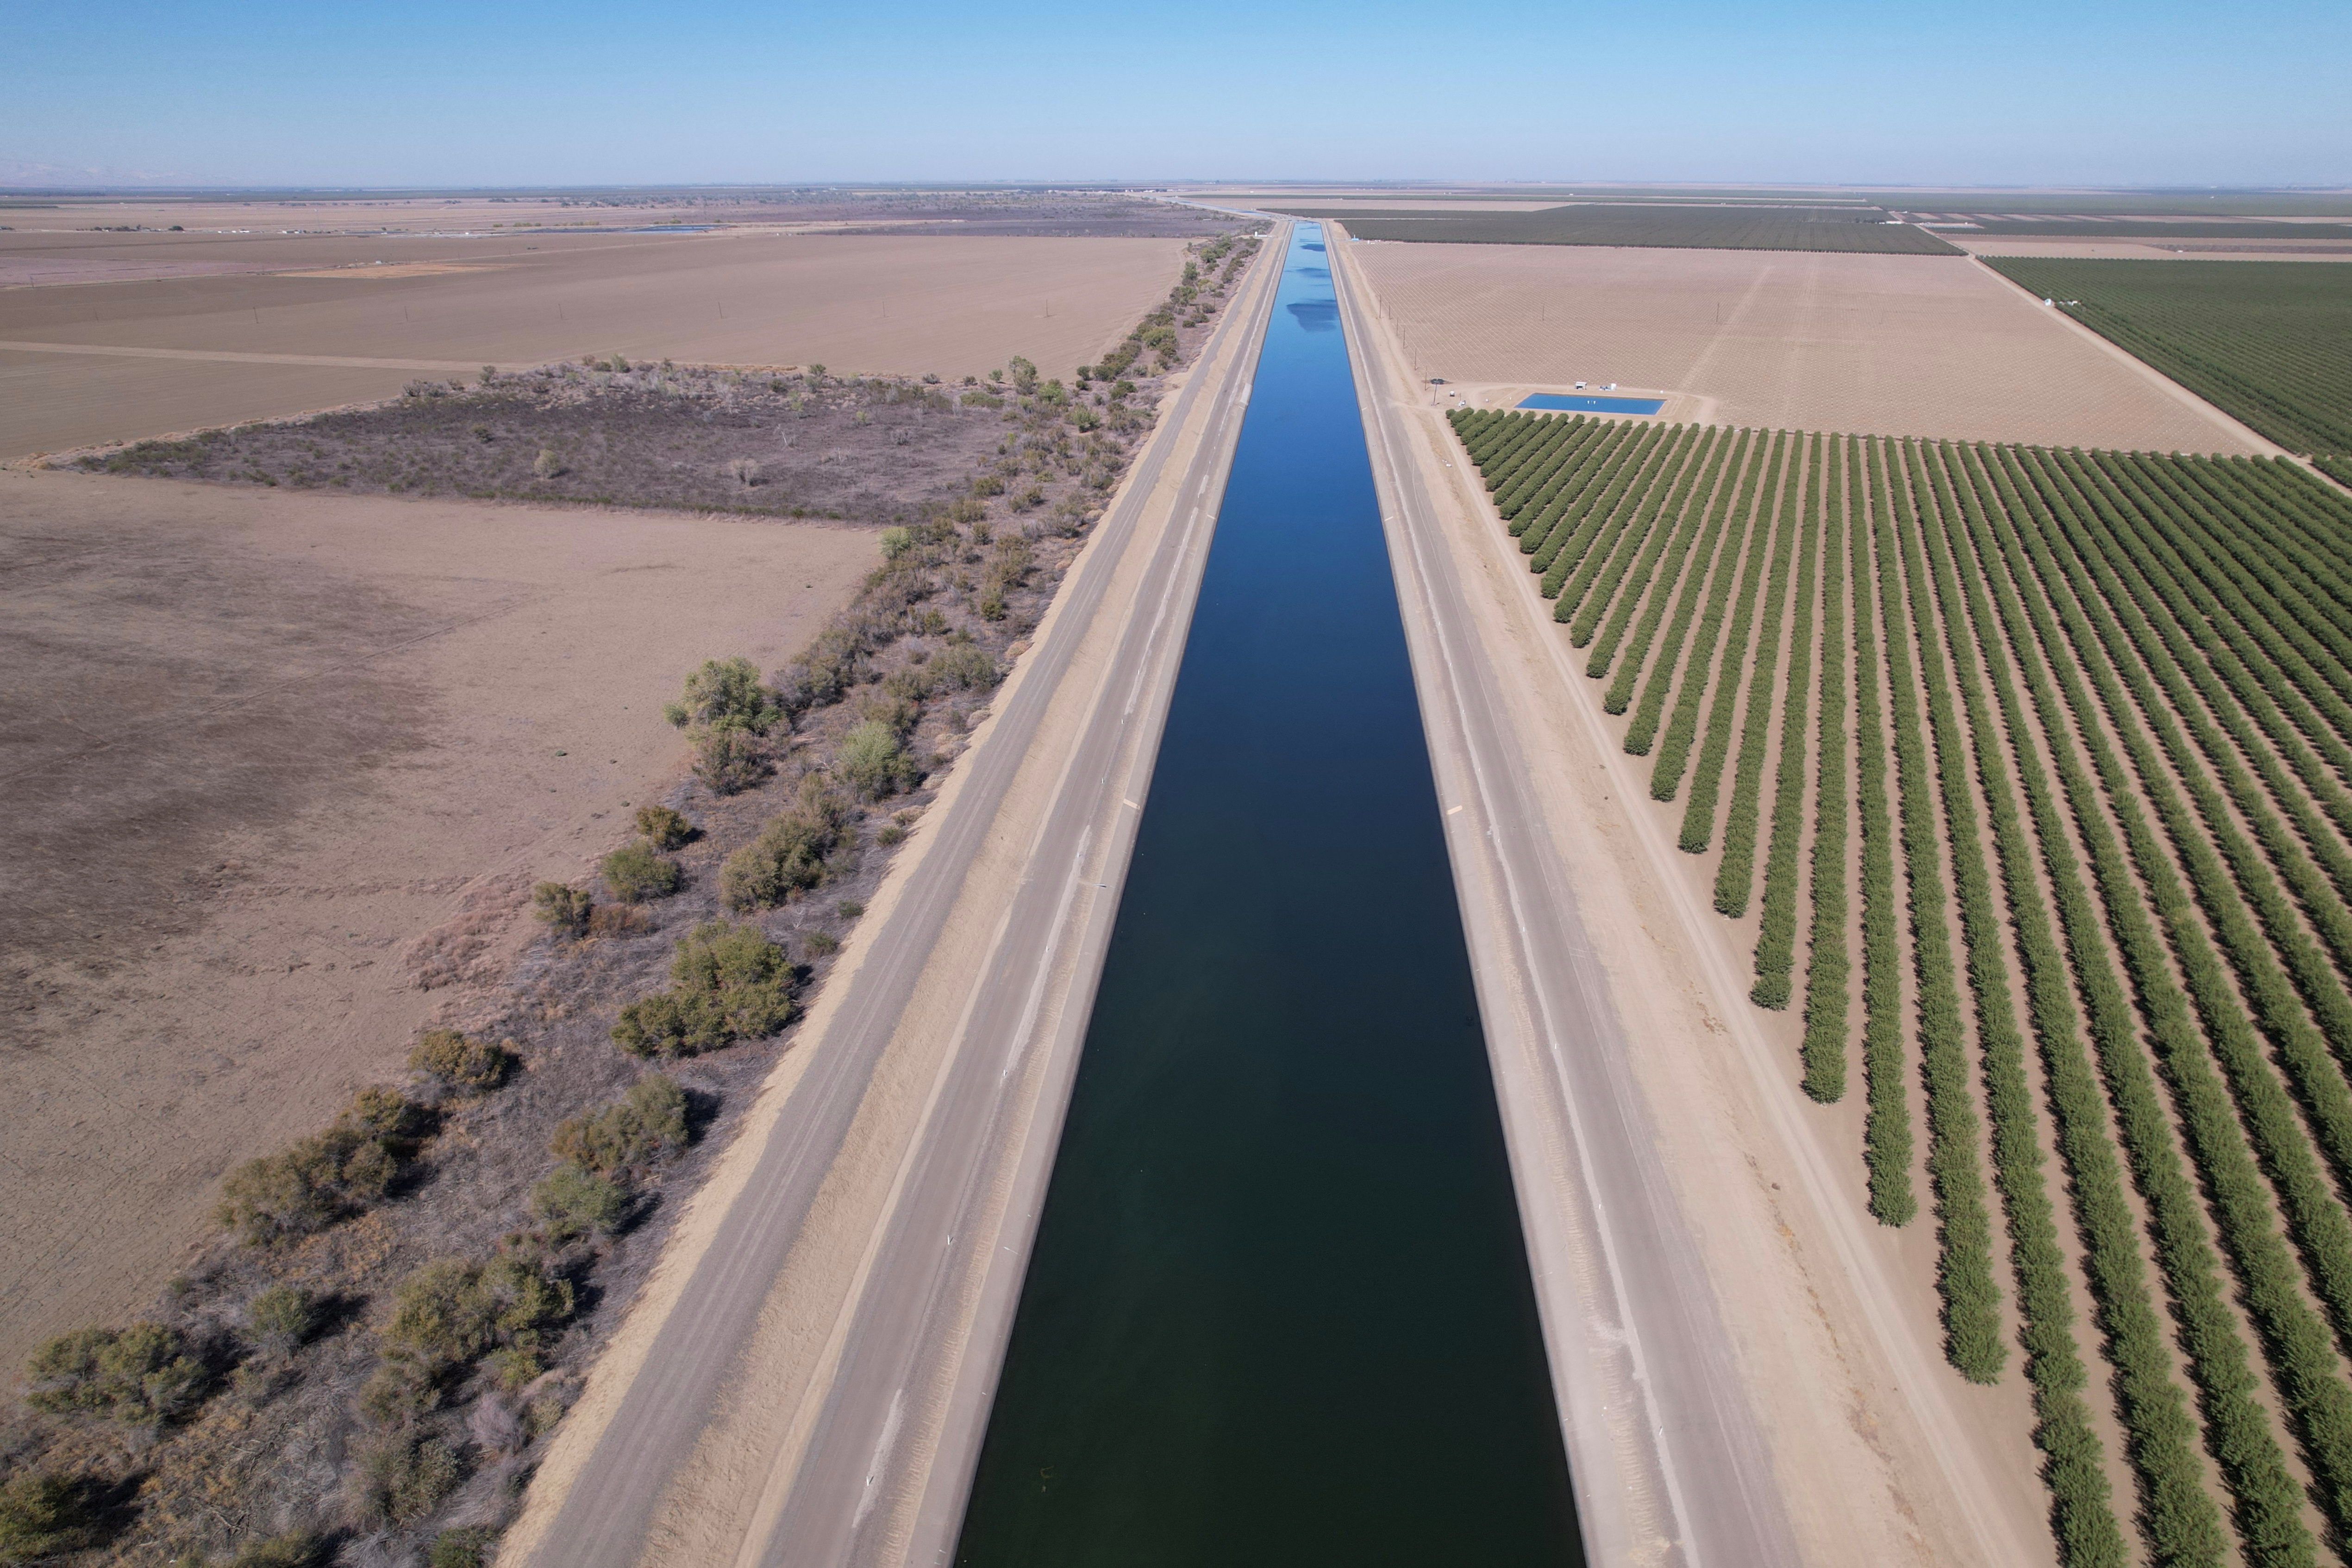 California farmers aim to recharge aquifers by diverting floodwaters to fallowed land